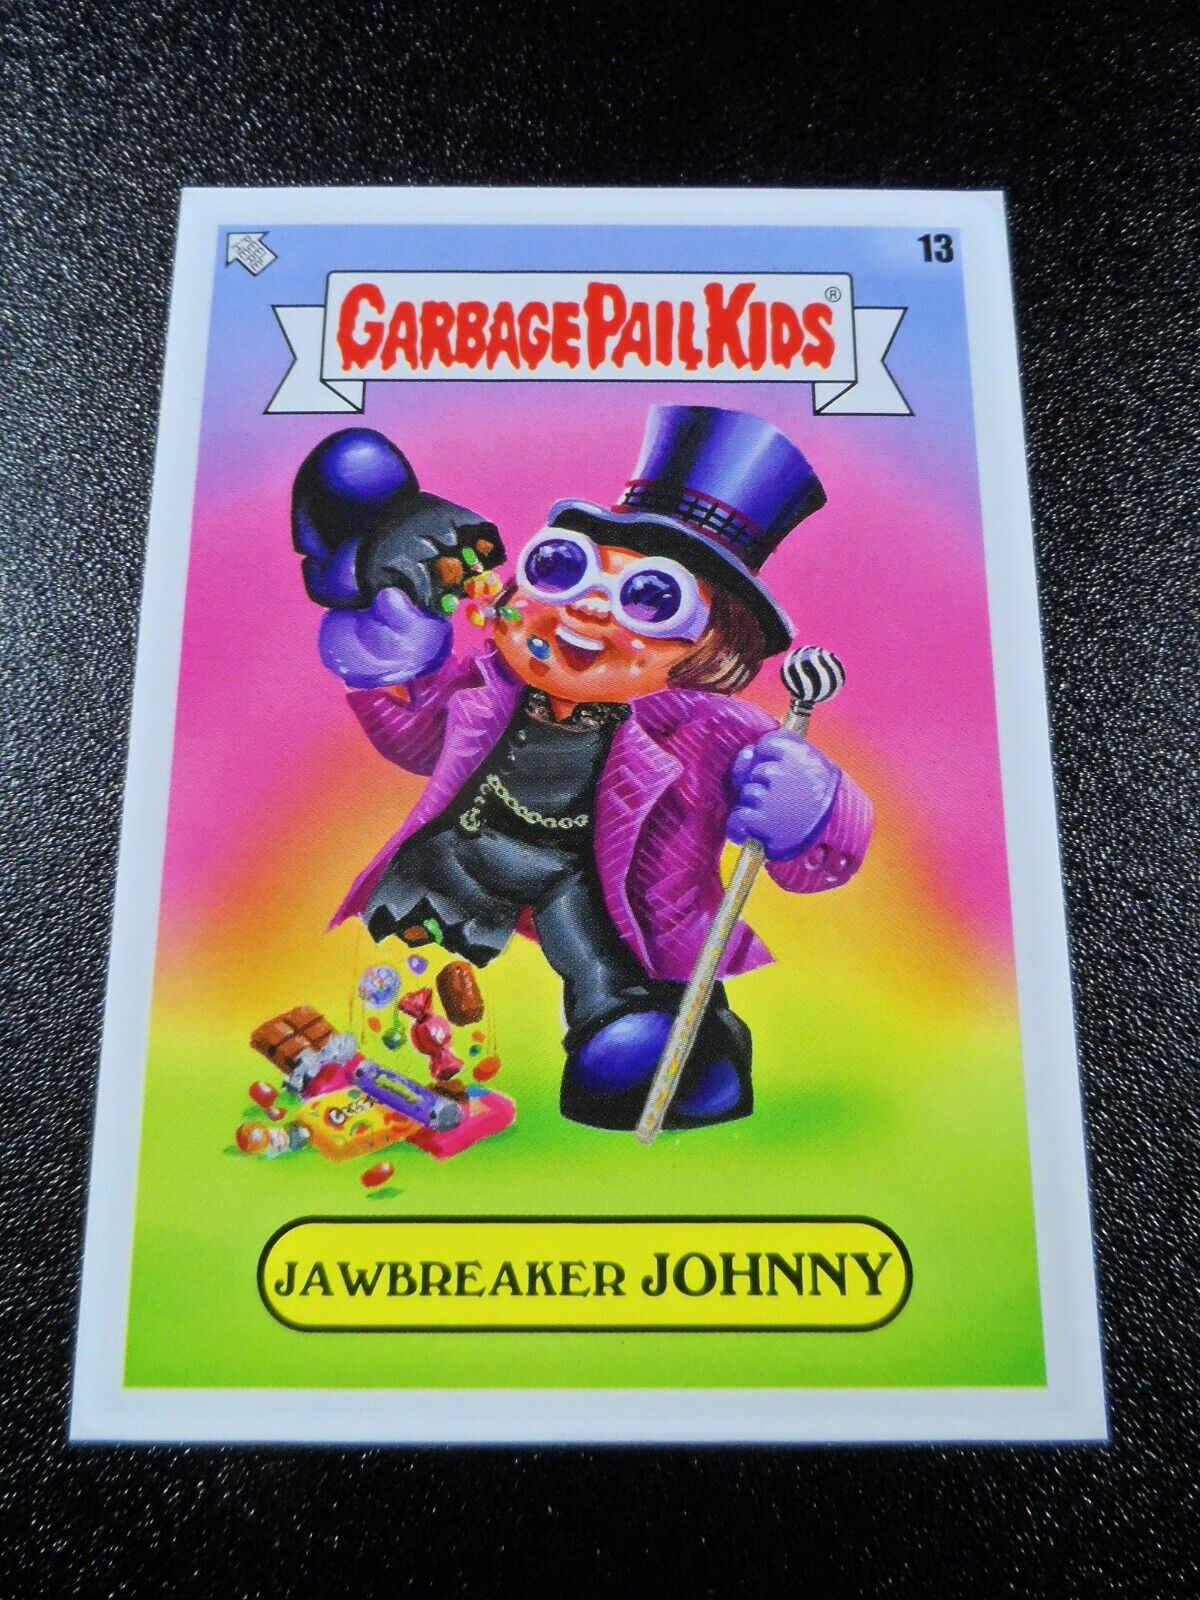 Willy Wonka & The Chocolate Factory Johnny Depp Spoof Garbage Pail Kids Card